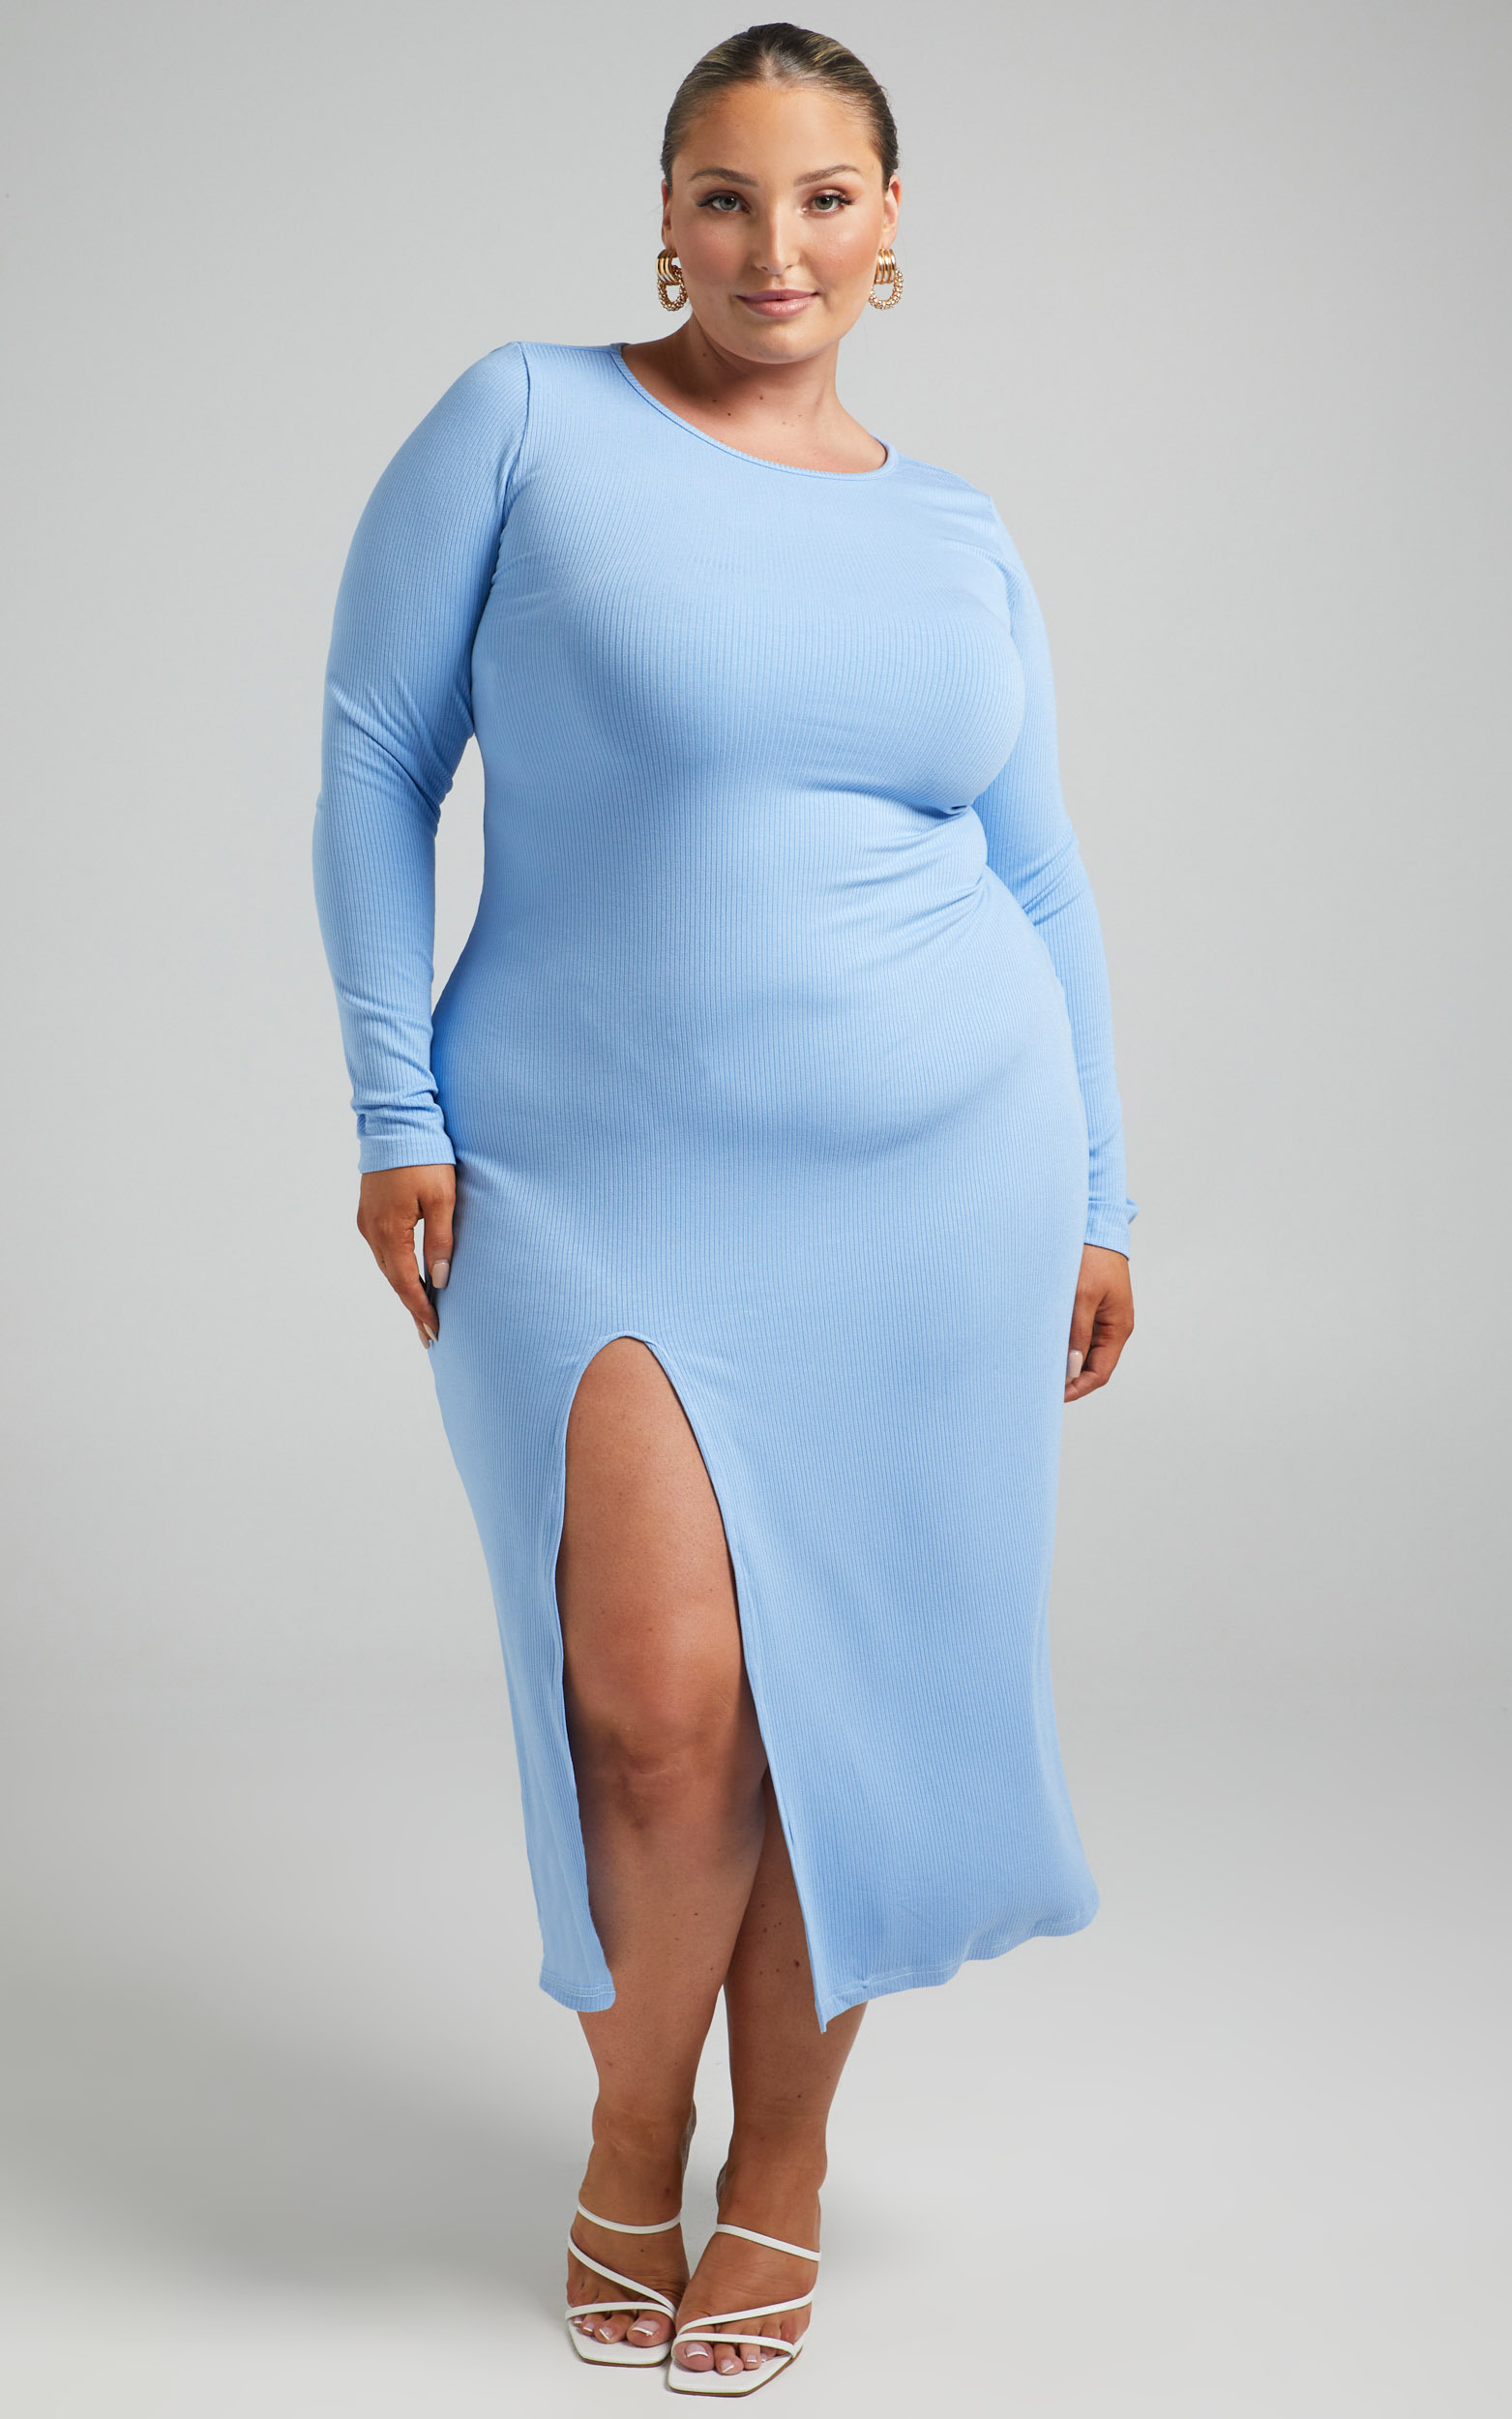 Jaeleigh Long sleeve Midi Dress with Cut Out Back in Cornflower Blue - 04, BLU1, hi-res image number null